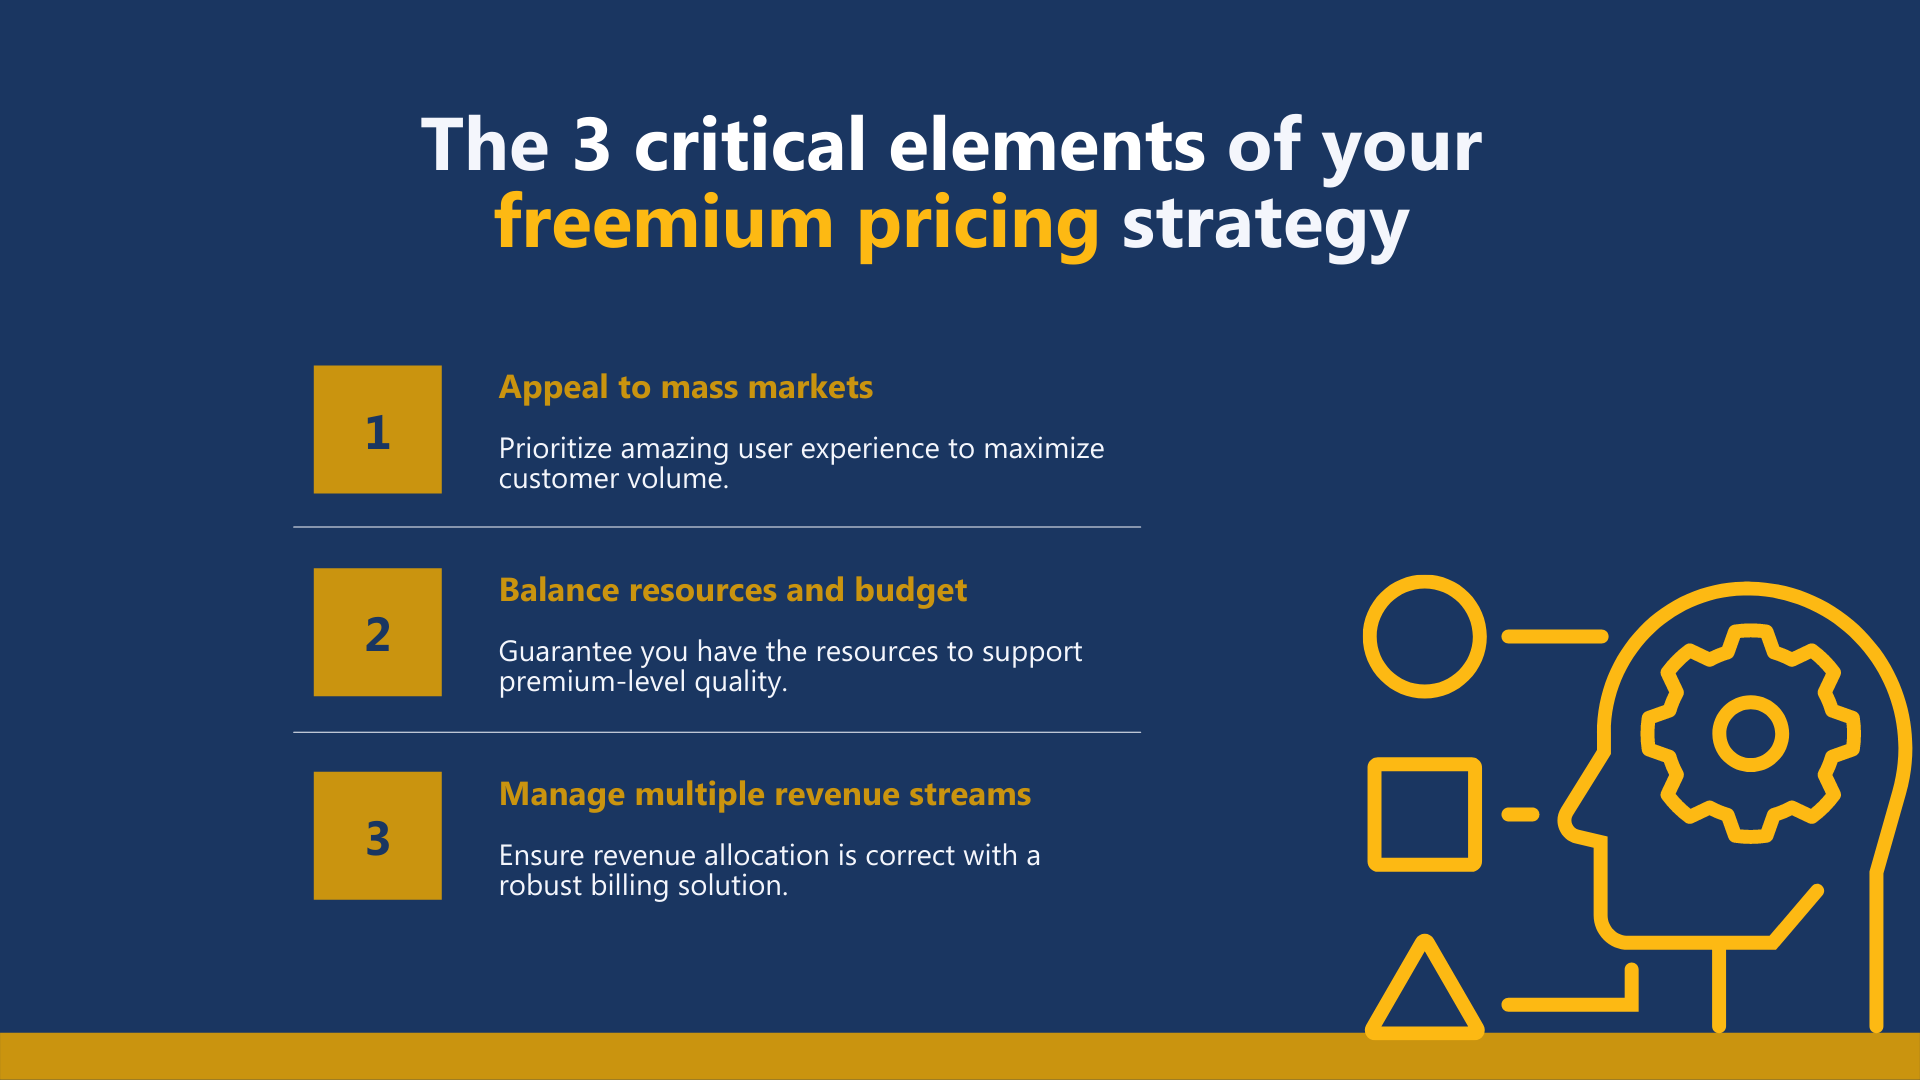 Three critical elements of your freemium pricing strategy